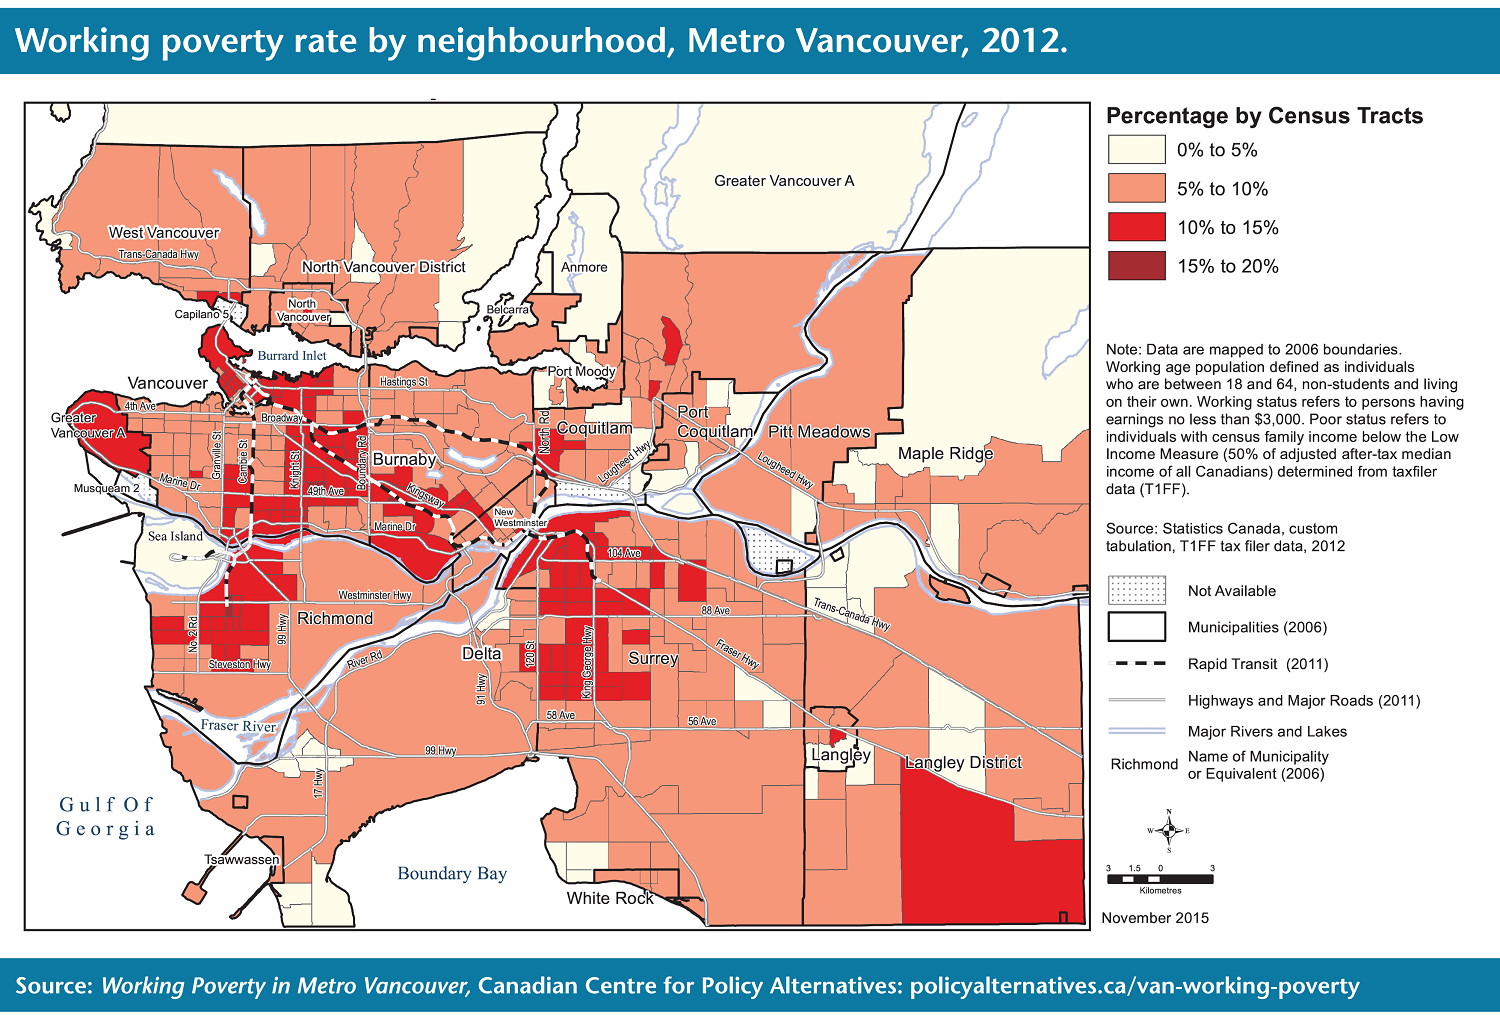 map2-workingPovertyRate2012-ccpa_0